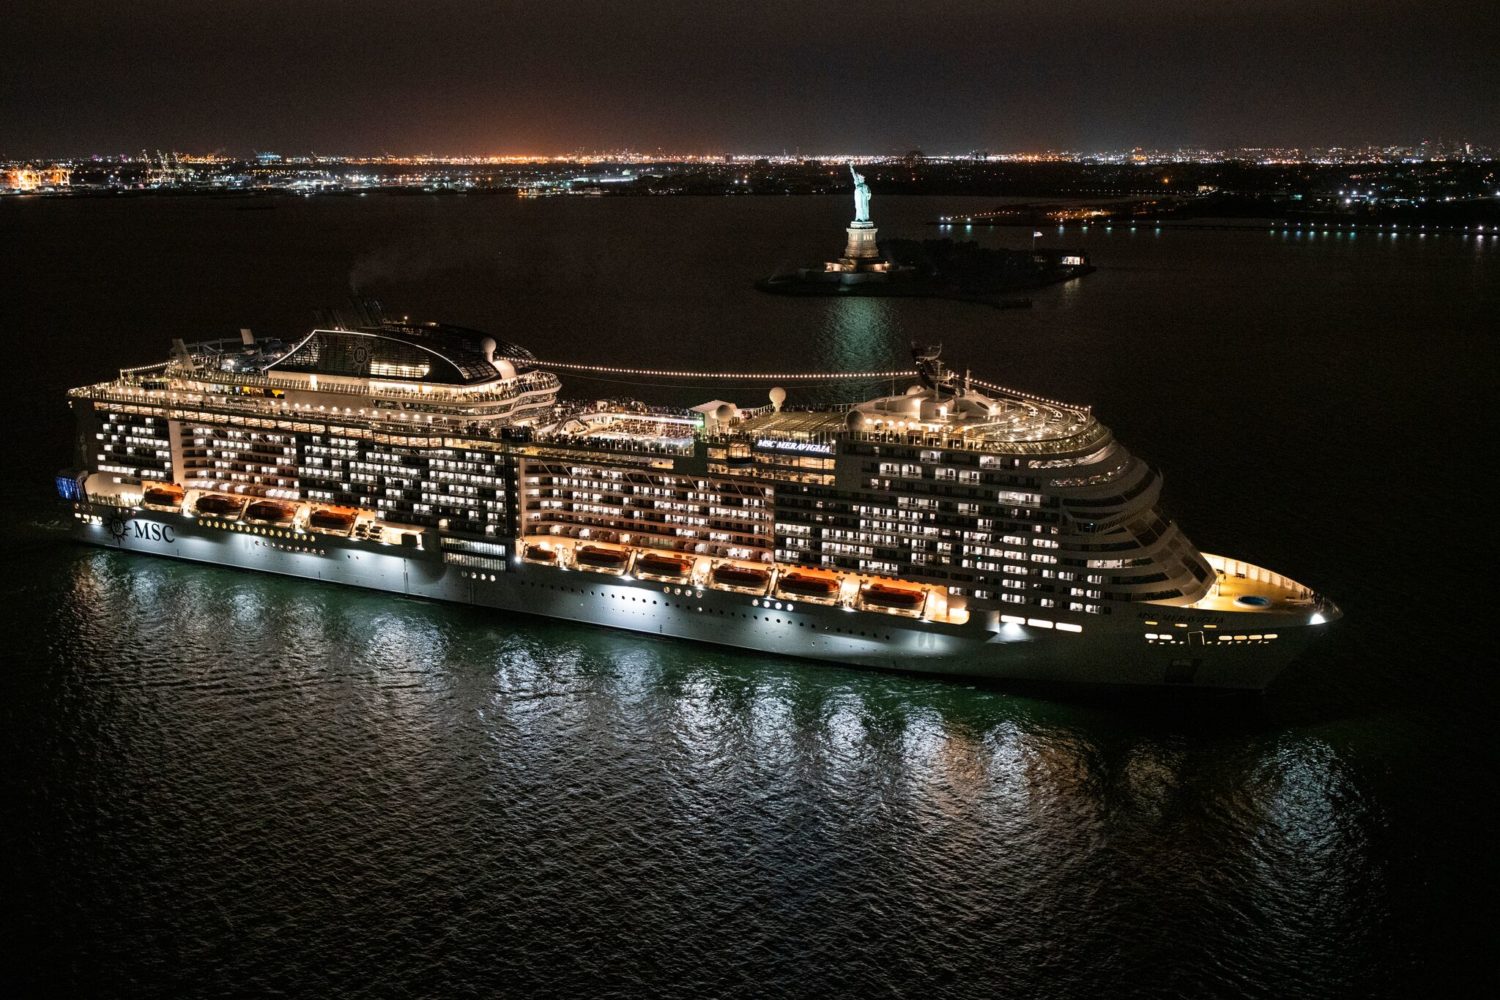 msc cruise out of new york